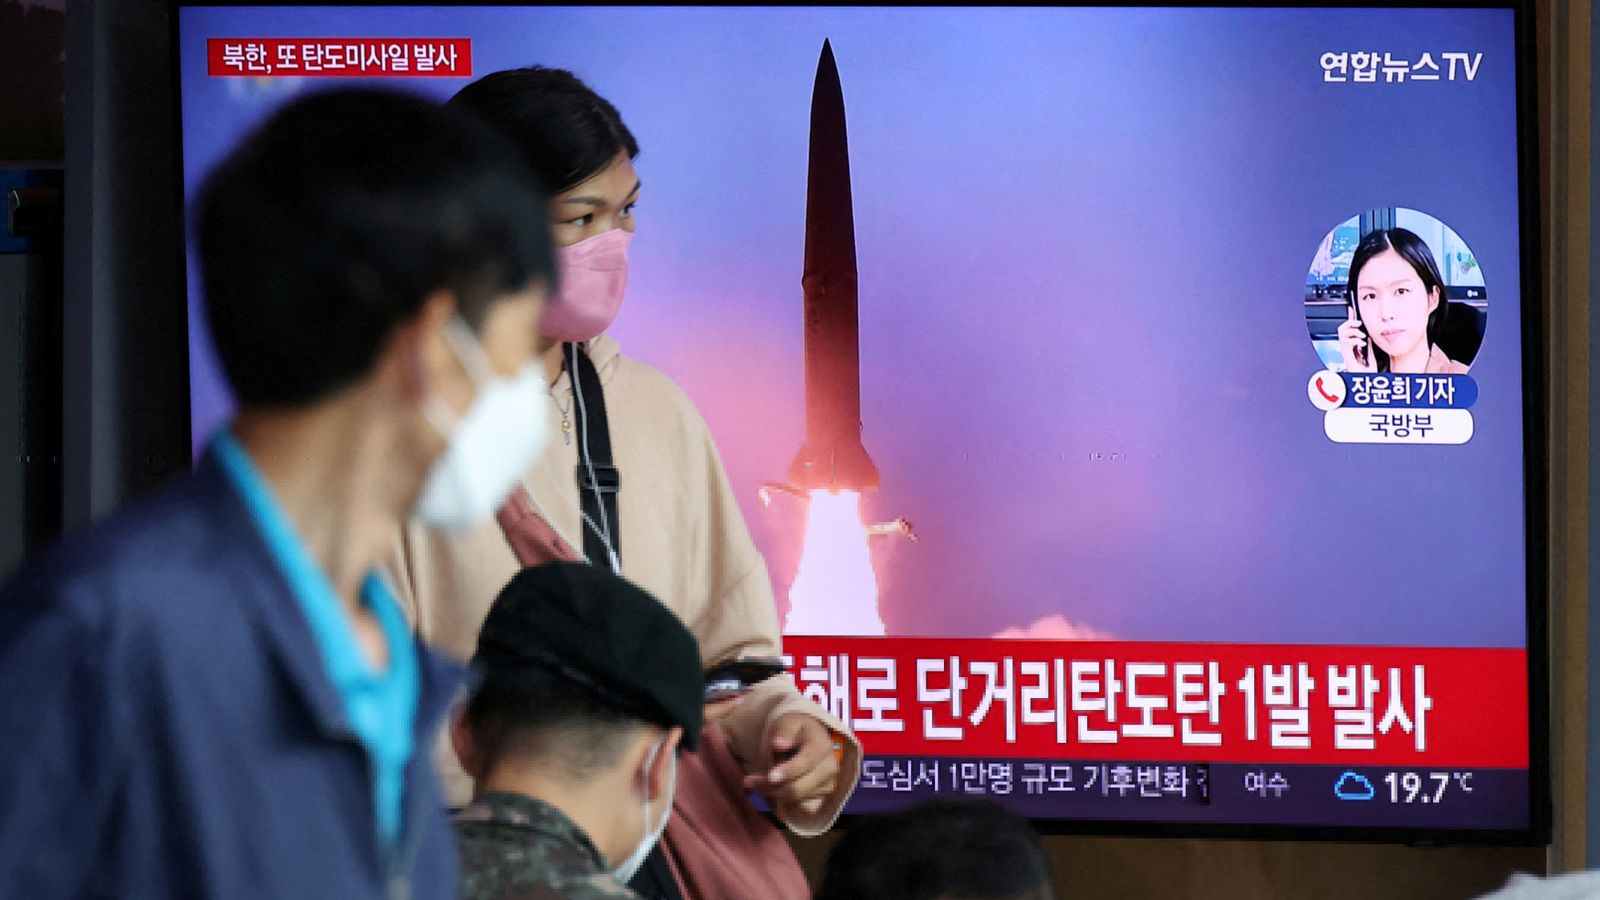 North Korea Launches Missile Over Japan Warning People To Go To The 